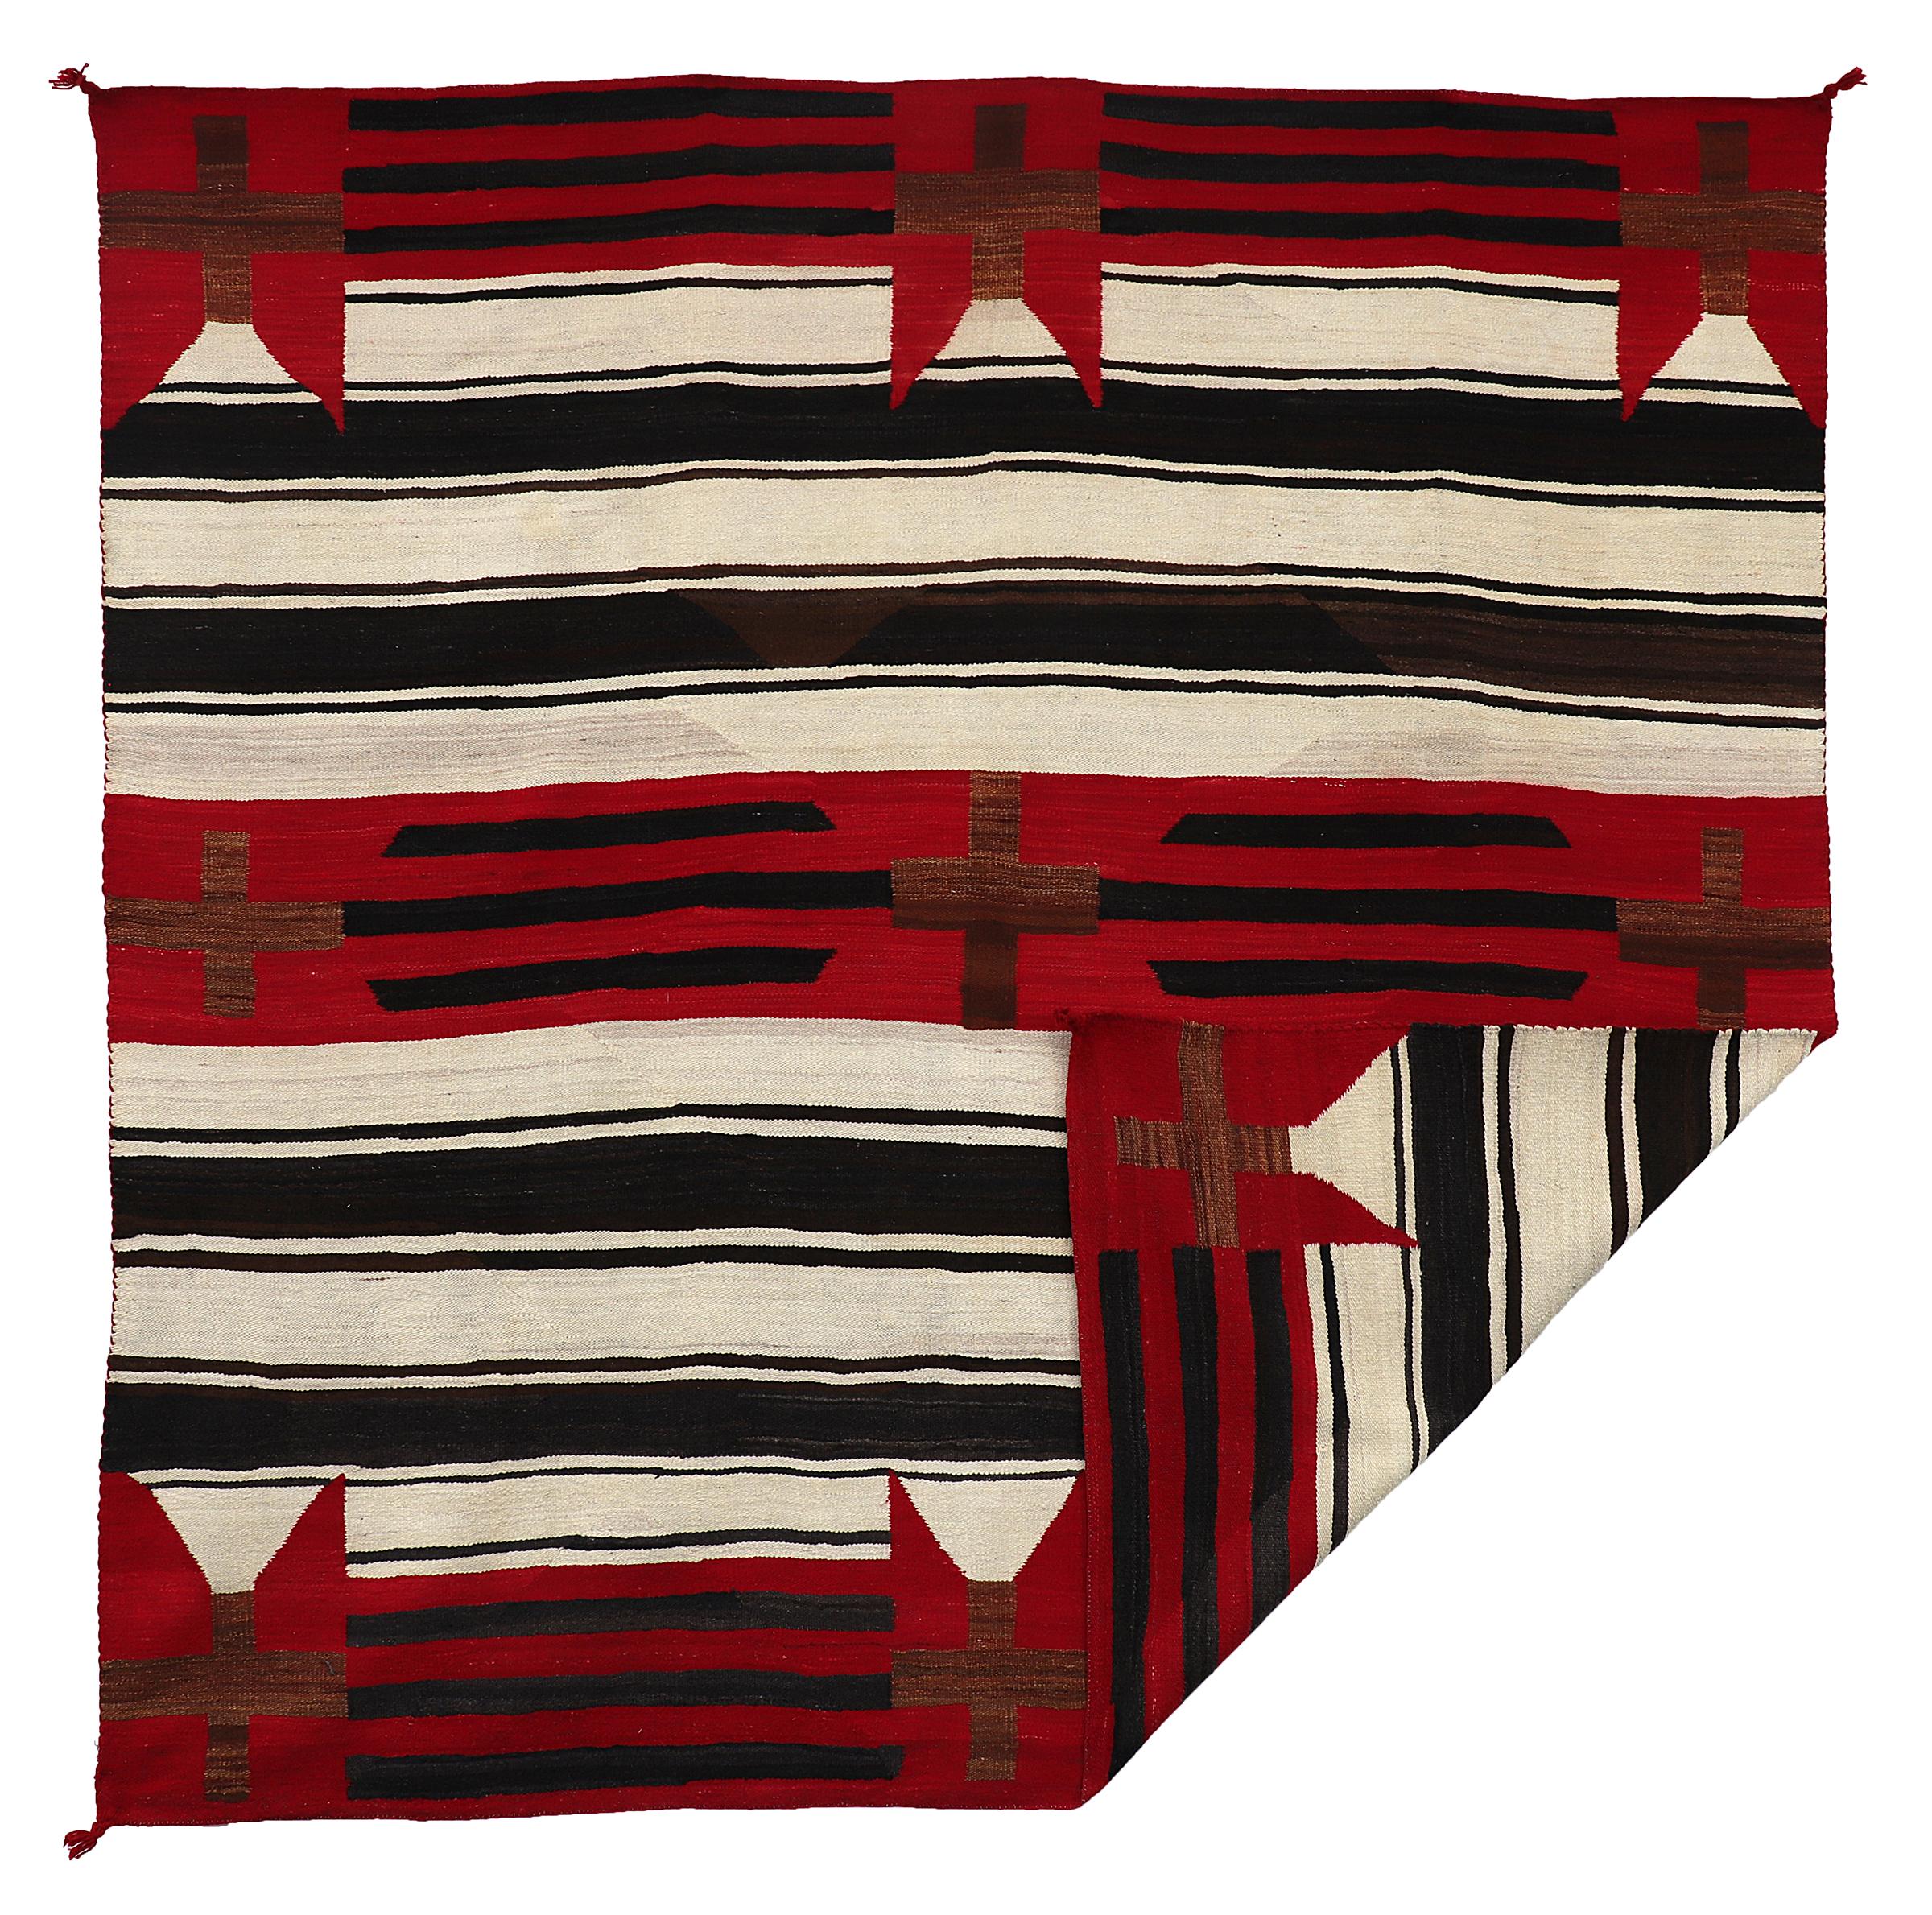 Vintage 1930s Navajo Trading Post era Chiefs Blanket in a unique variant pattern with crosses and a classic banded background. Woven of native handspun wool in natural fleece colors of white/ivory, Brown and black with aniline dyed red.
This